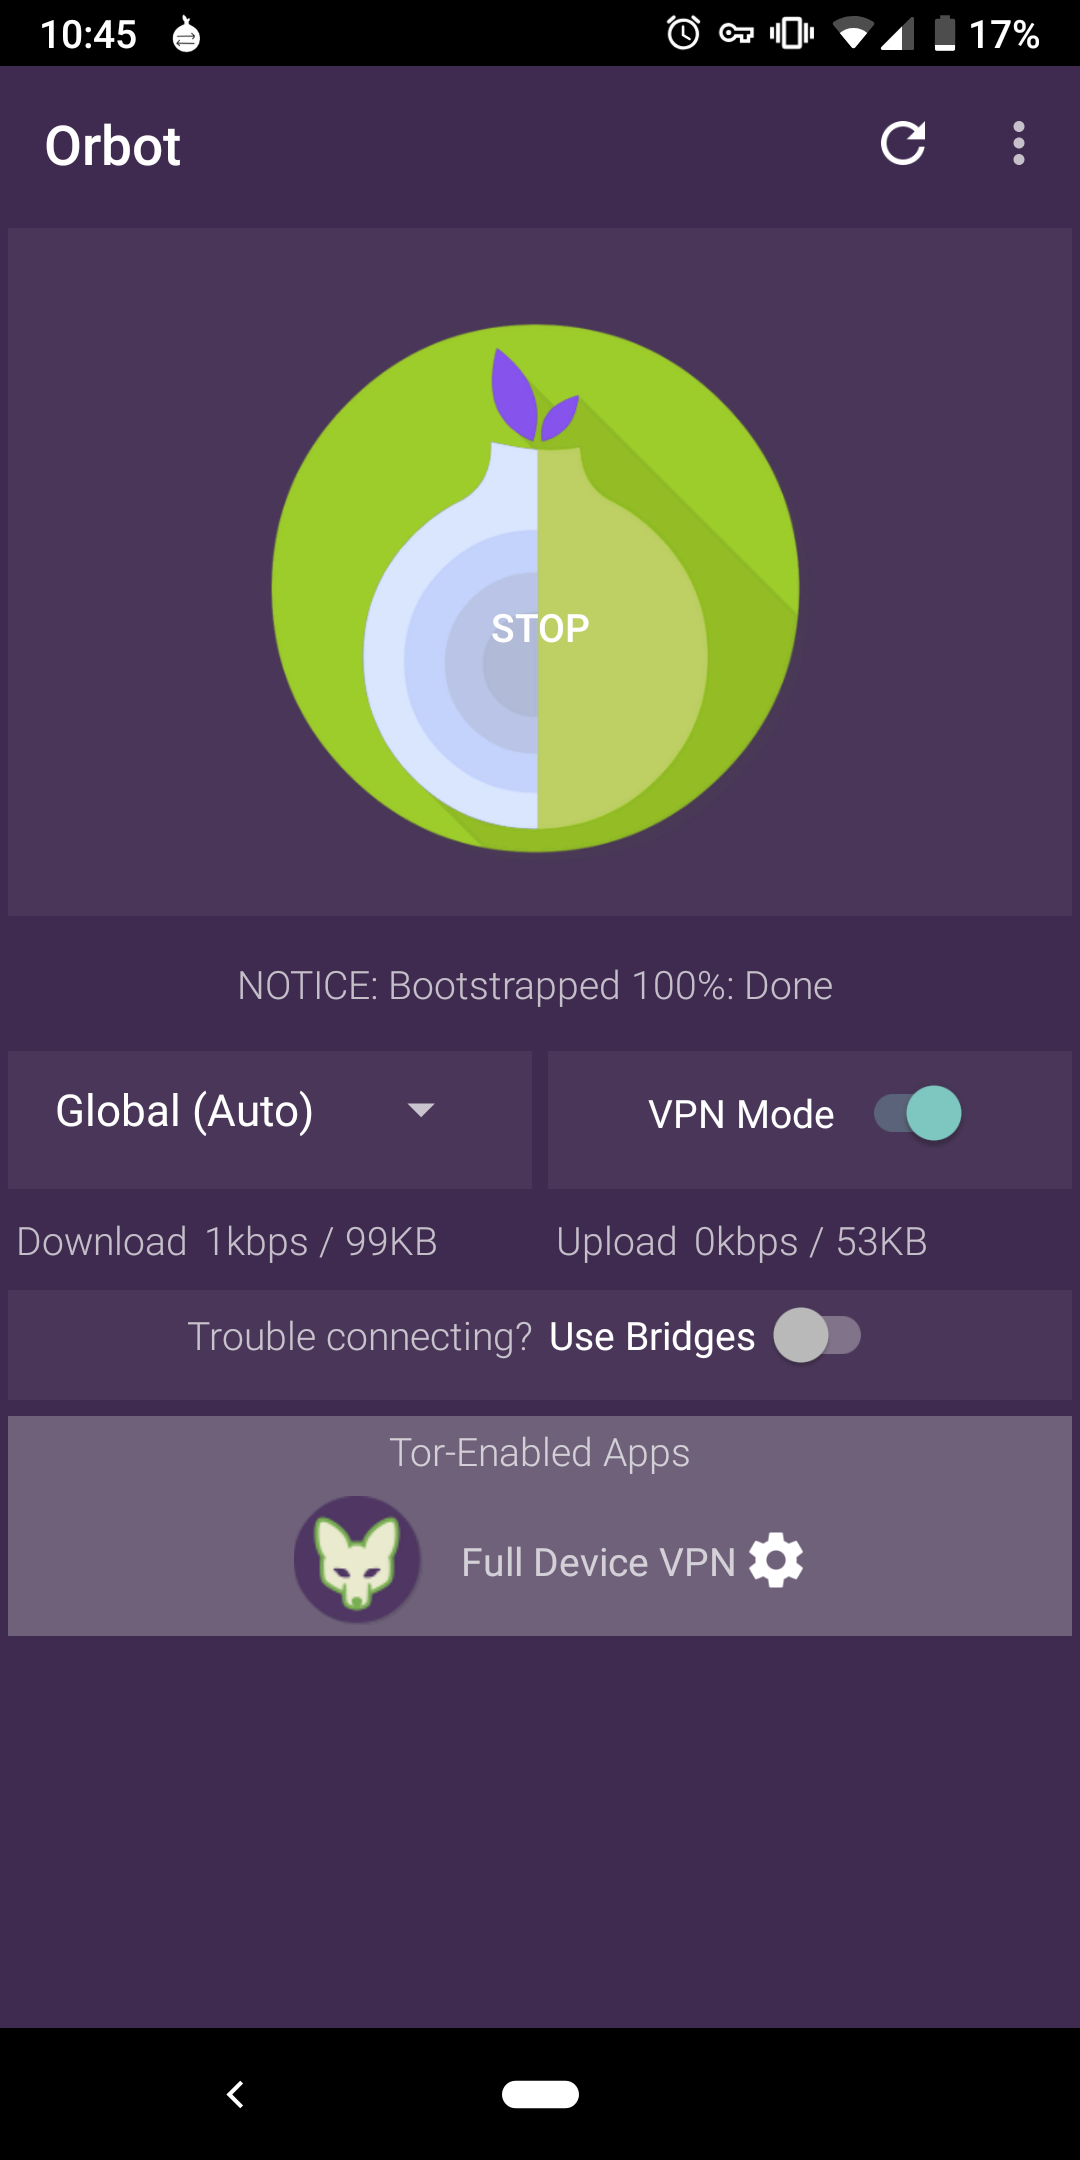 what is tor vpn mode